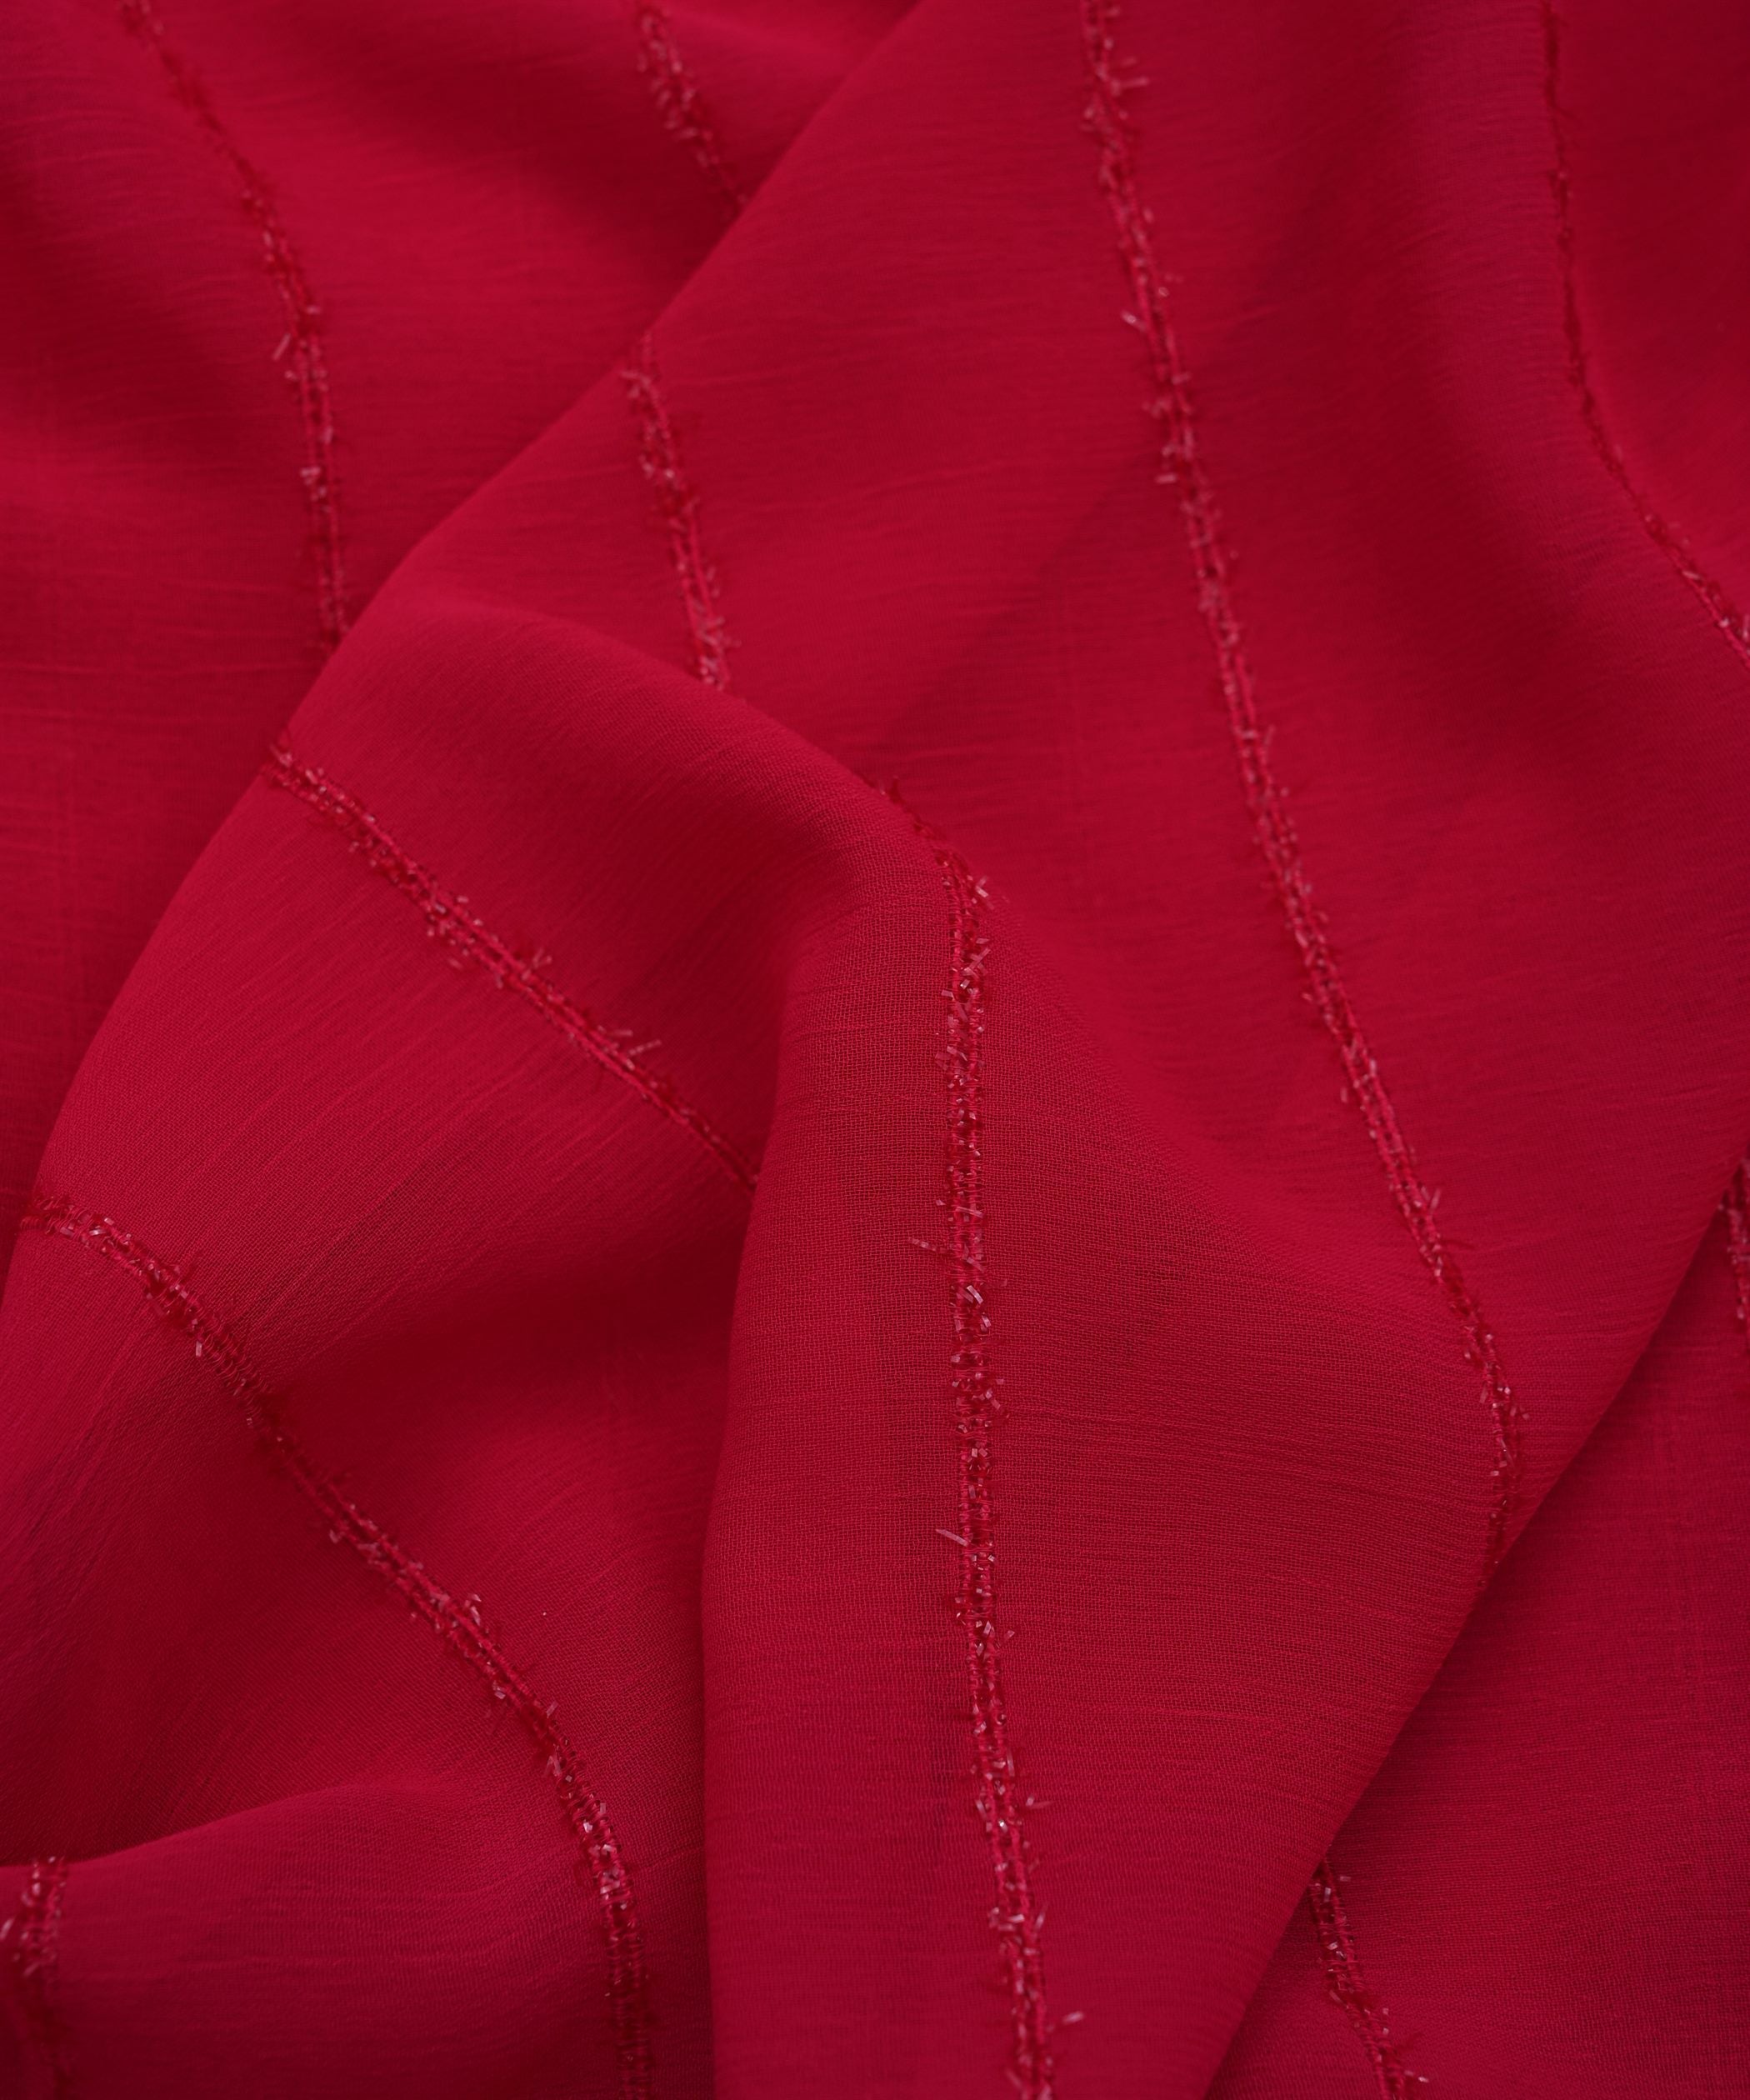 Hot Pink Georgette Fabric with Fur Lining